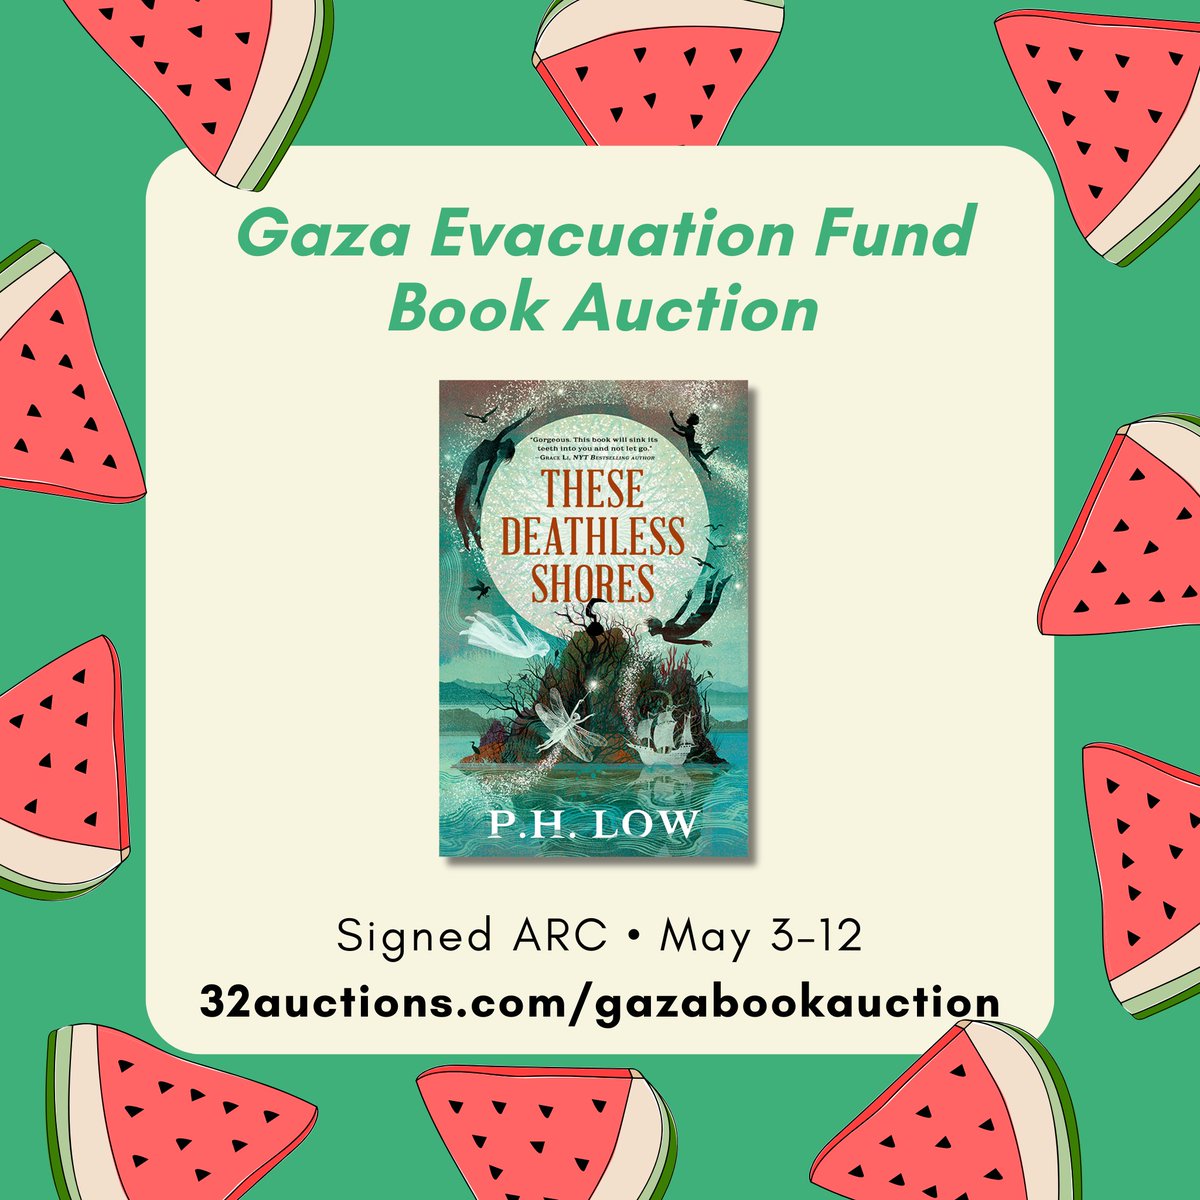 Hello friends! I've donated a signed ARC of THESE DEATHLESS SHORES to the Gaza Evacuation Fund Book Auction! There are a bunch of amazing bookish goods up for bidding from May 3–12! L✨nk in bio~